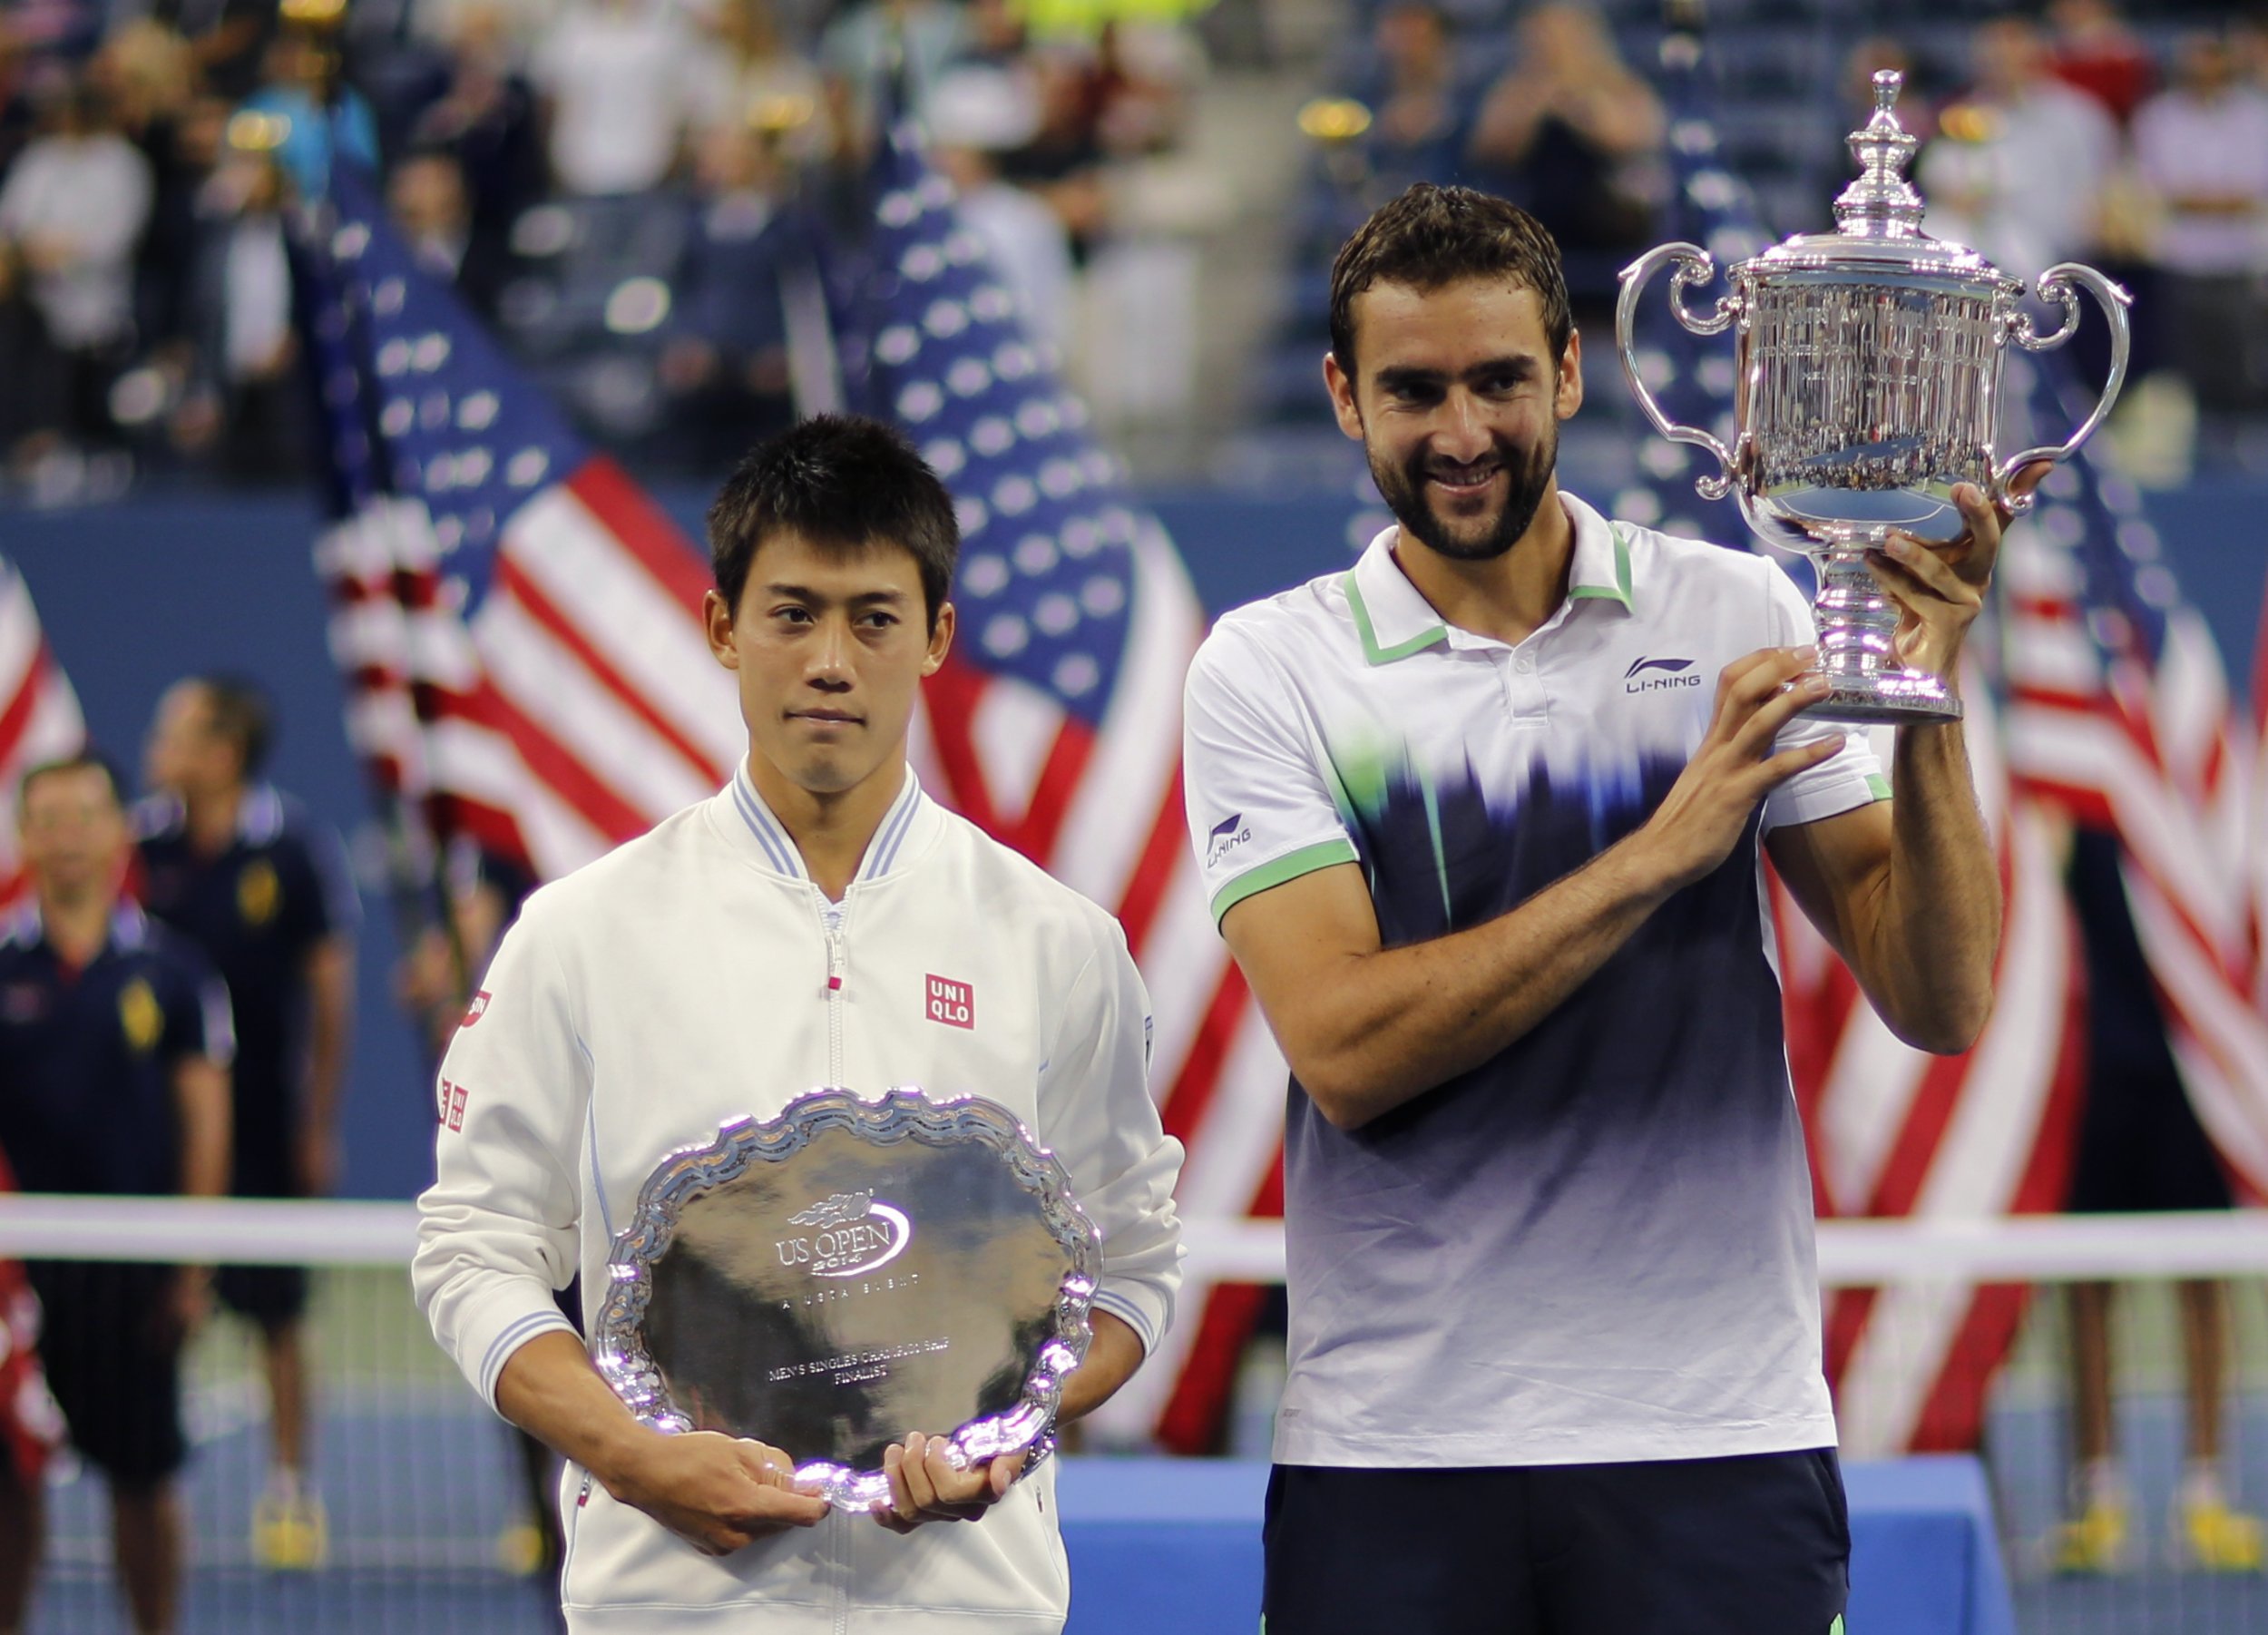 US Open 2014 Mens Final TV Ratings Čilić And Nishikori Struggle To Draw Viewers As CBS Bows Out